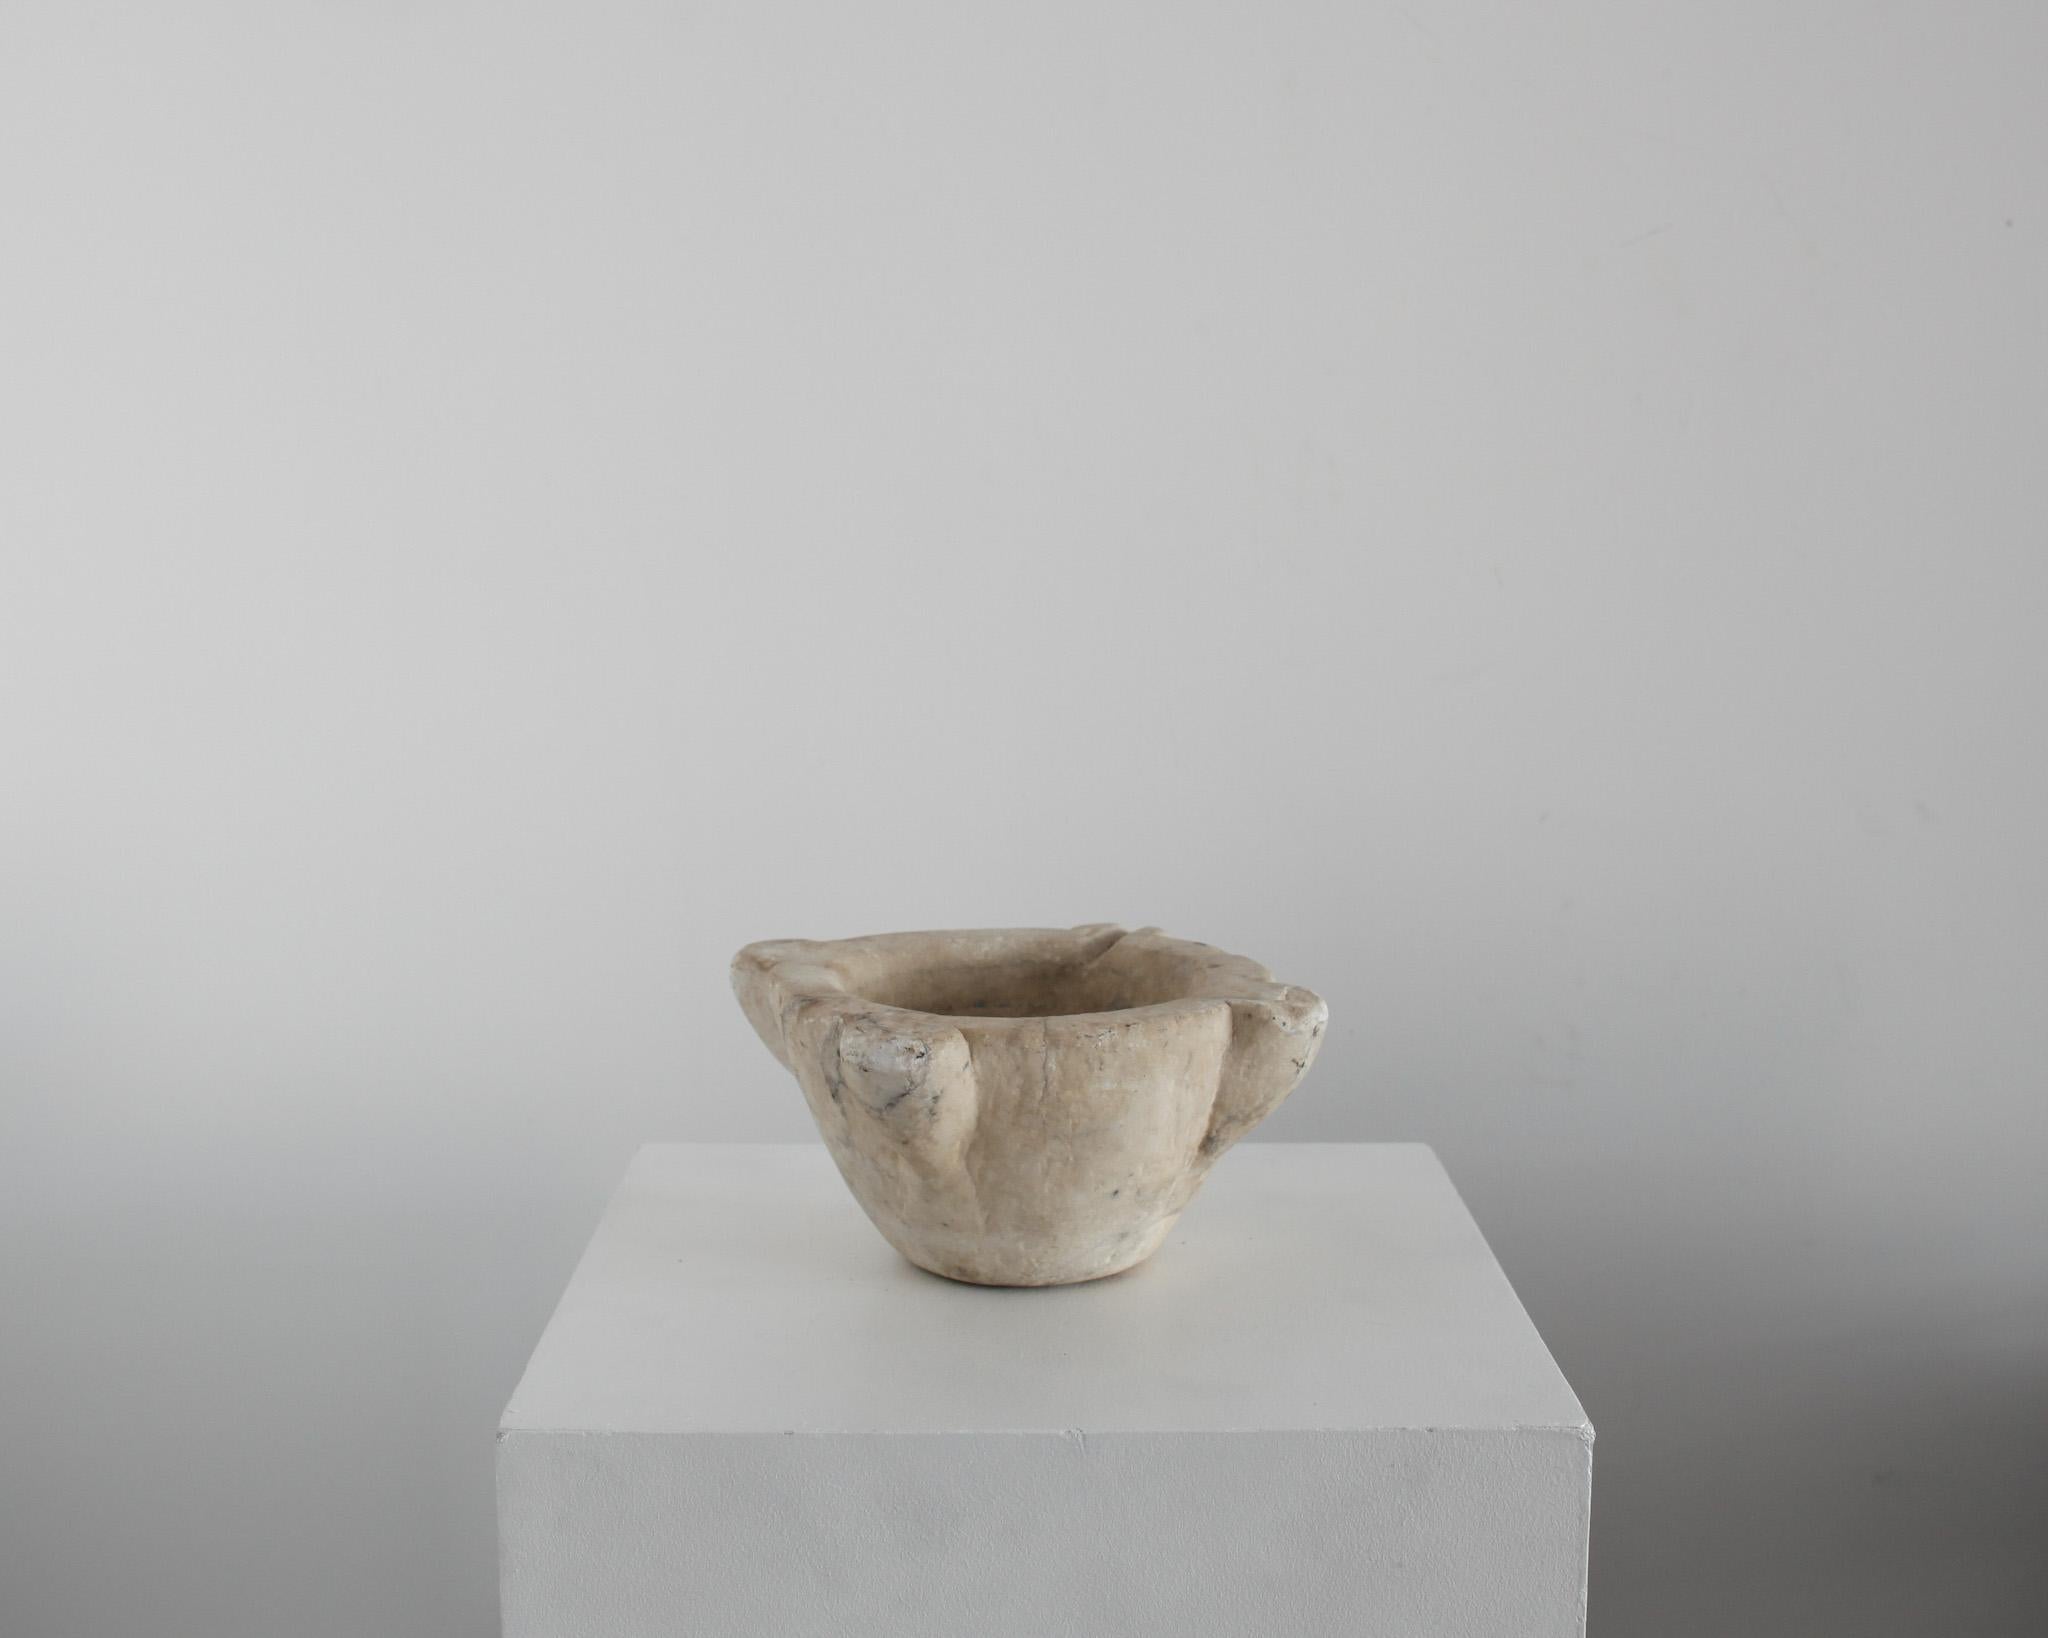 19th Century A Large And Simple Primitive Wabi Sabi Early 19Th C. Catalan Marble Mortar  